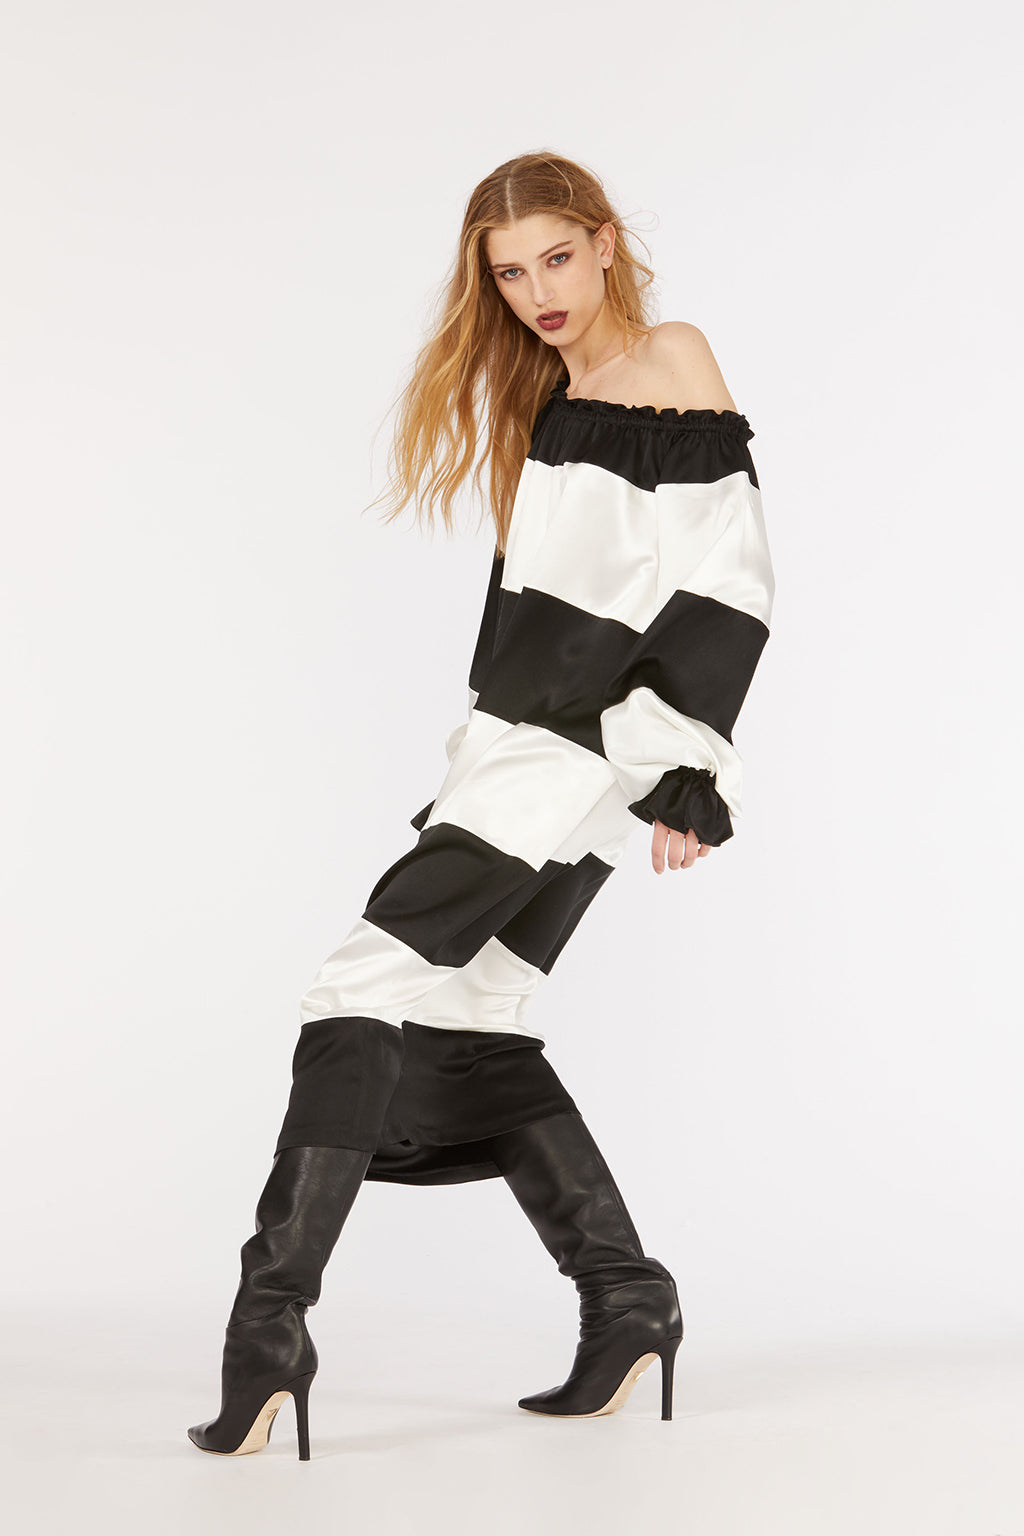 Cynthia Rowley Fall 2018 look 9 featuring a black and white stripe off-shoulder dress. 